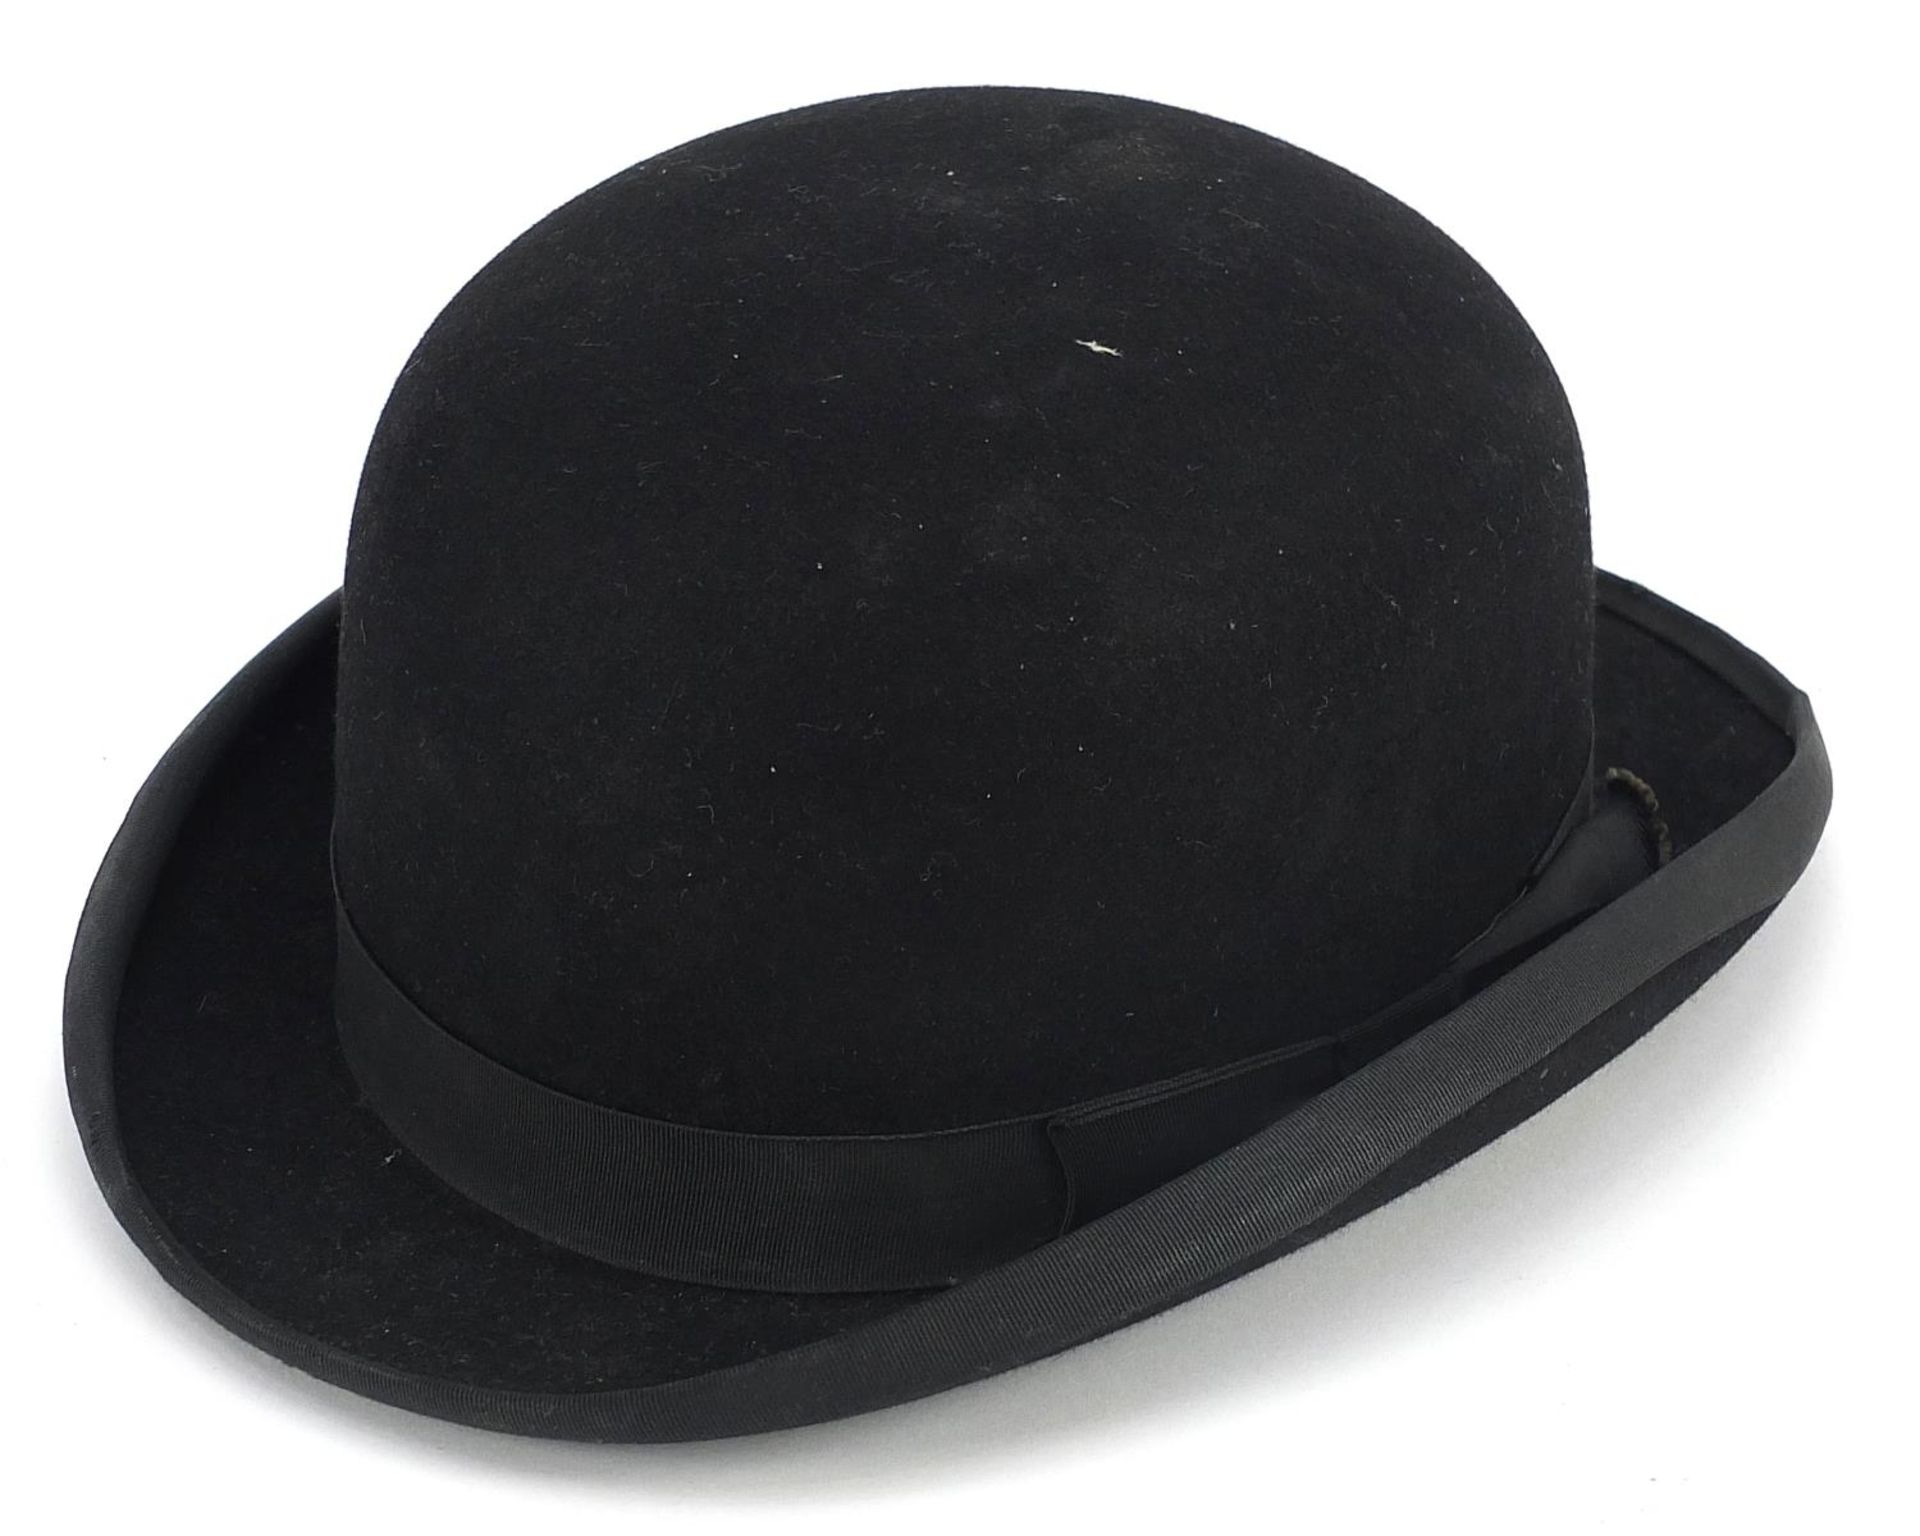 Dunn & Co of Piccadilly Circus London, gentlemen's bowler hat, the interior 20.5cm x 17cm